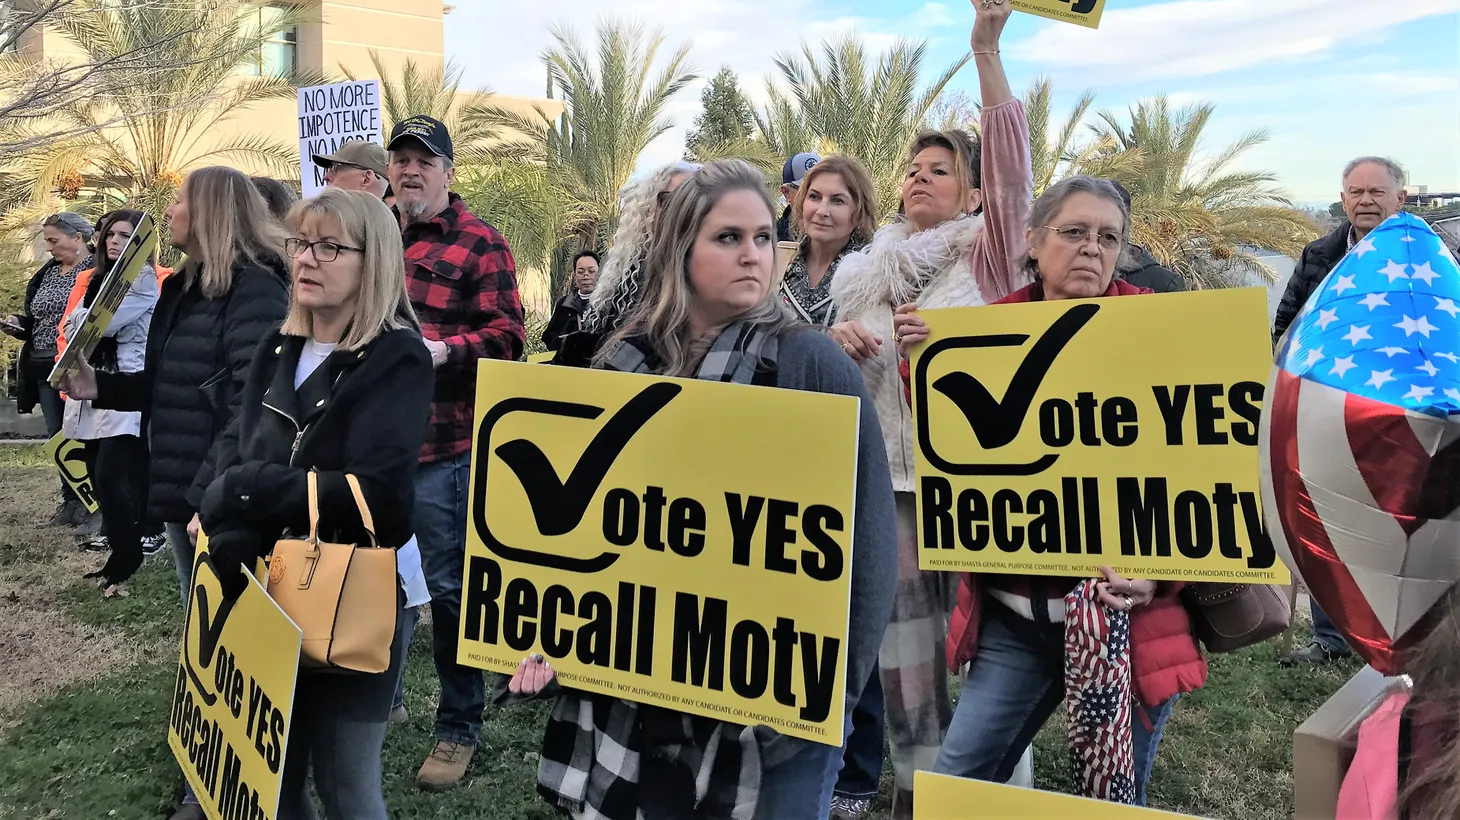 About 100 people stood outside the Shasta County Board of Supervisors chambers on Jan. 18, 2022, as the meeting was held virtually due to COVID-19. Many activists have been trying to oust Supervisor Leonard Moty.